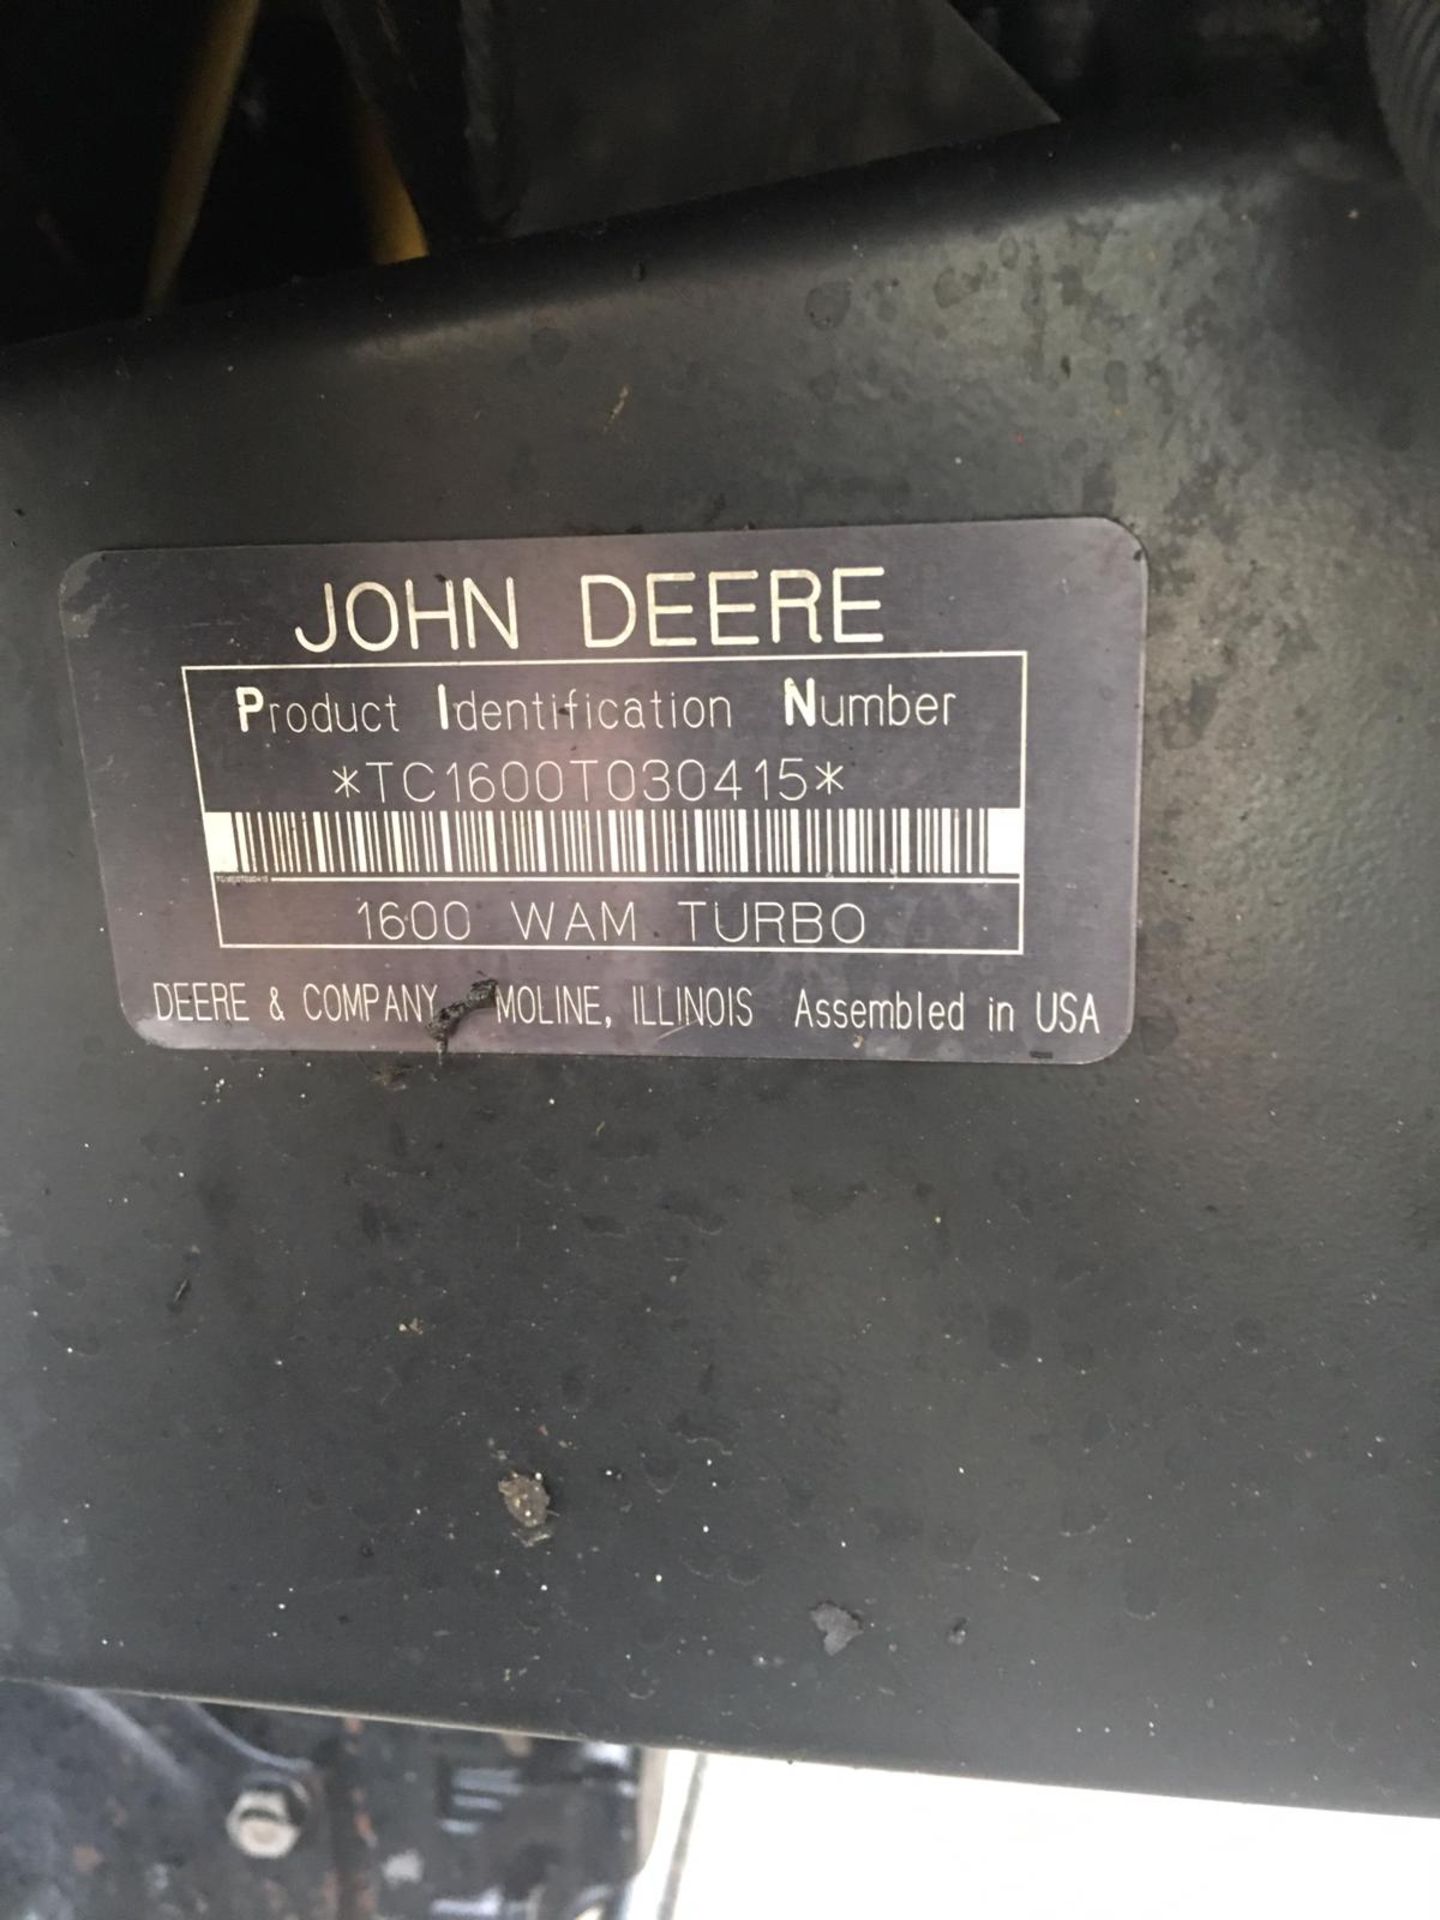 JOHN DEERE 1600 WIDE AREA TURBO BATWING RIDE ON LAWN MOWER, CRUISE CONTROL, RUNS & WORKS *NO VAT* - Image 24 of 24